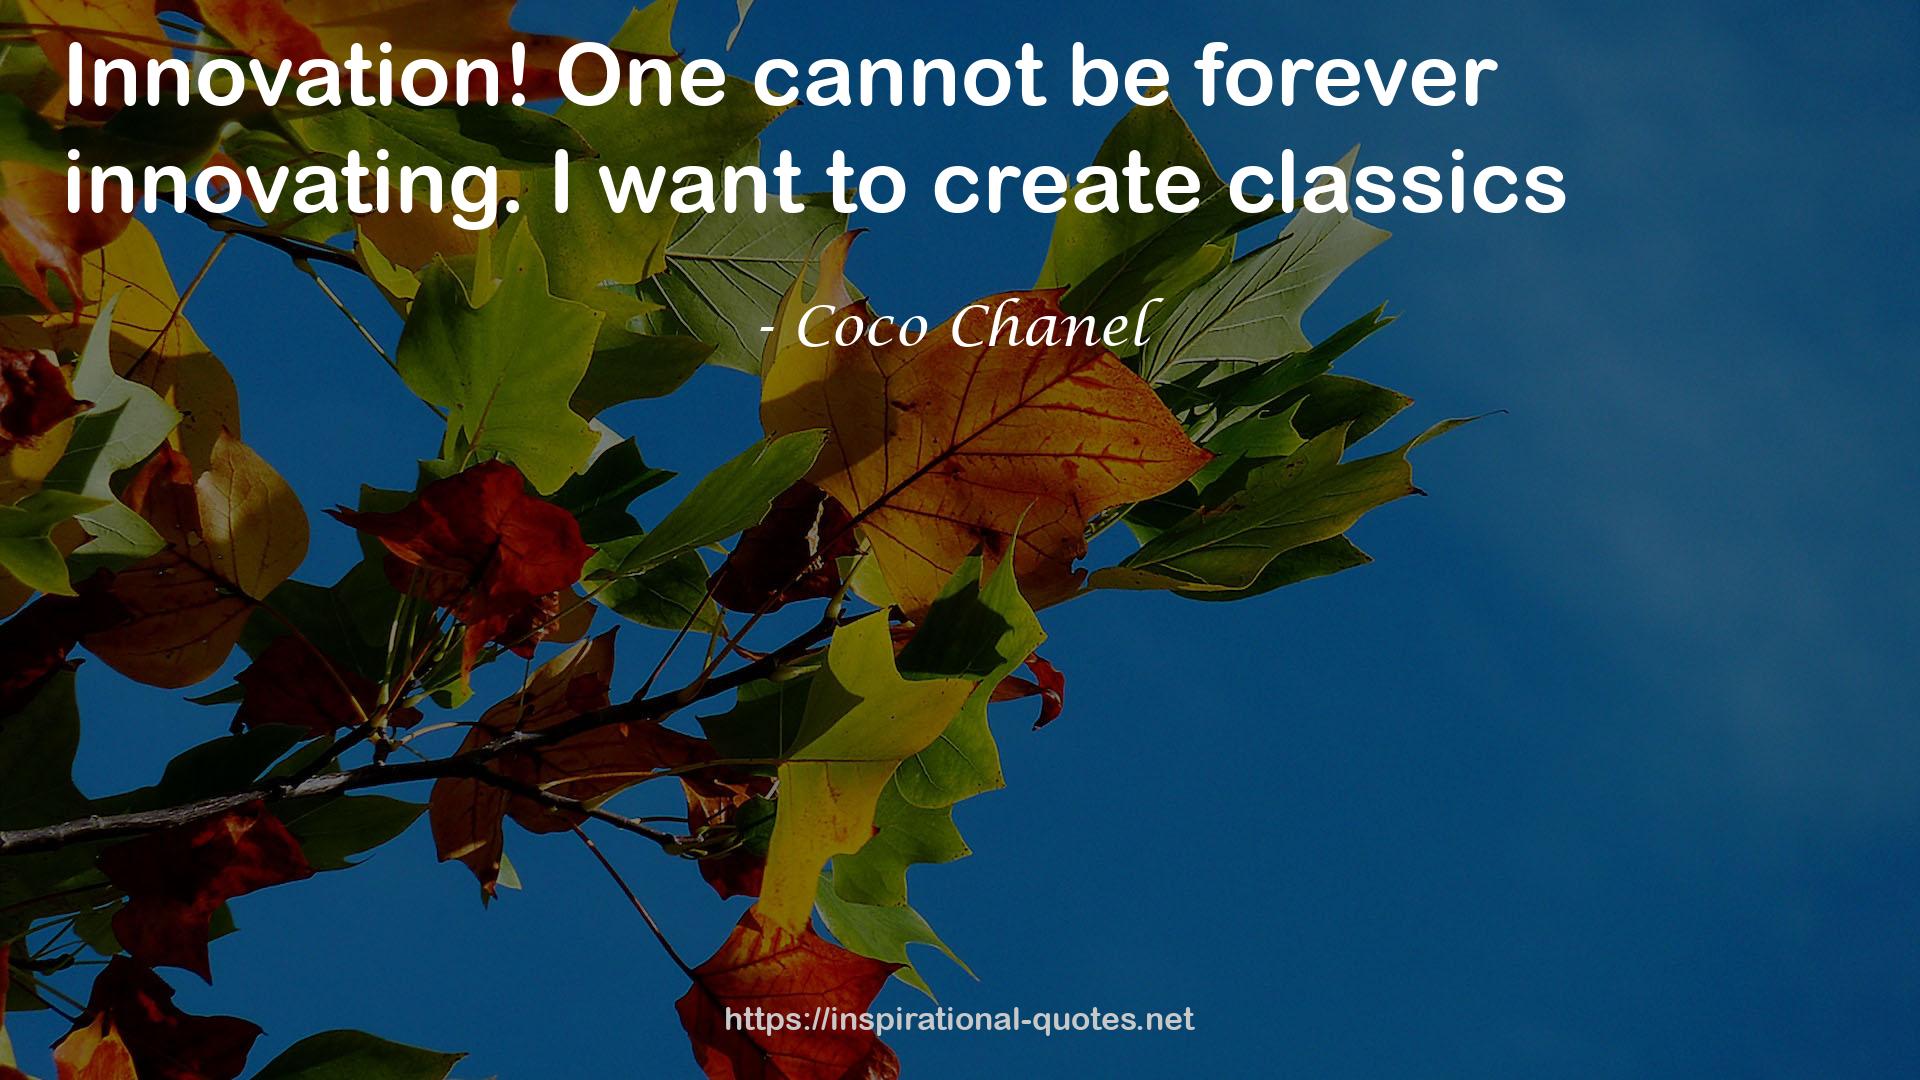 Coco Chanel QUOTES